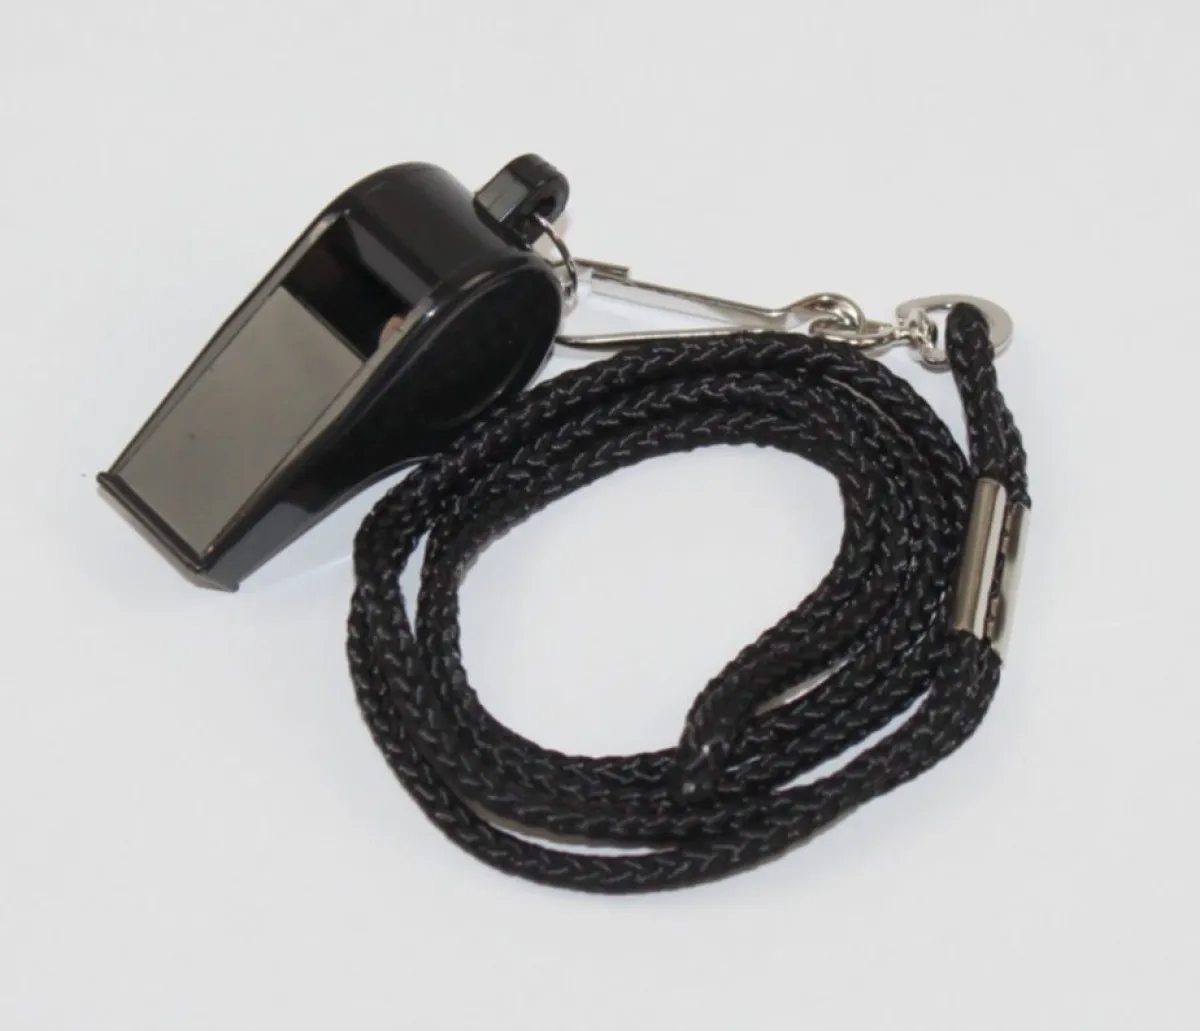 Plastic whistle, nickel-plated. With black lanyard. For judges, referees, referees